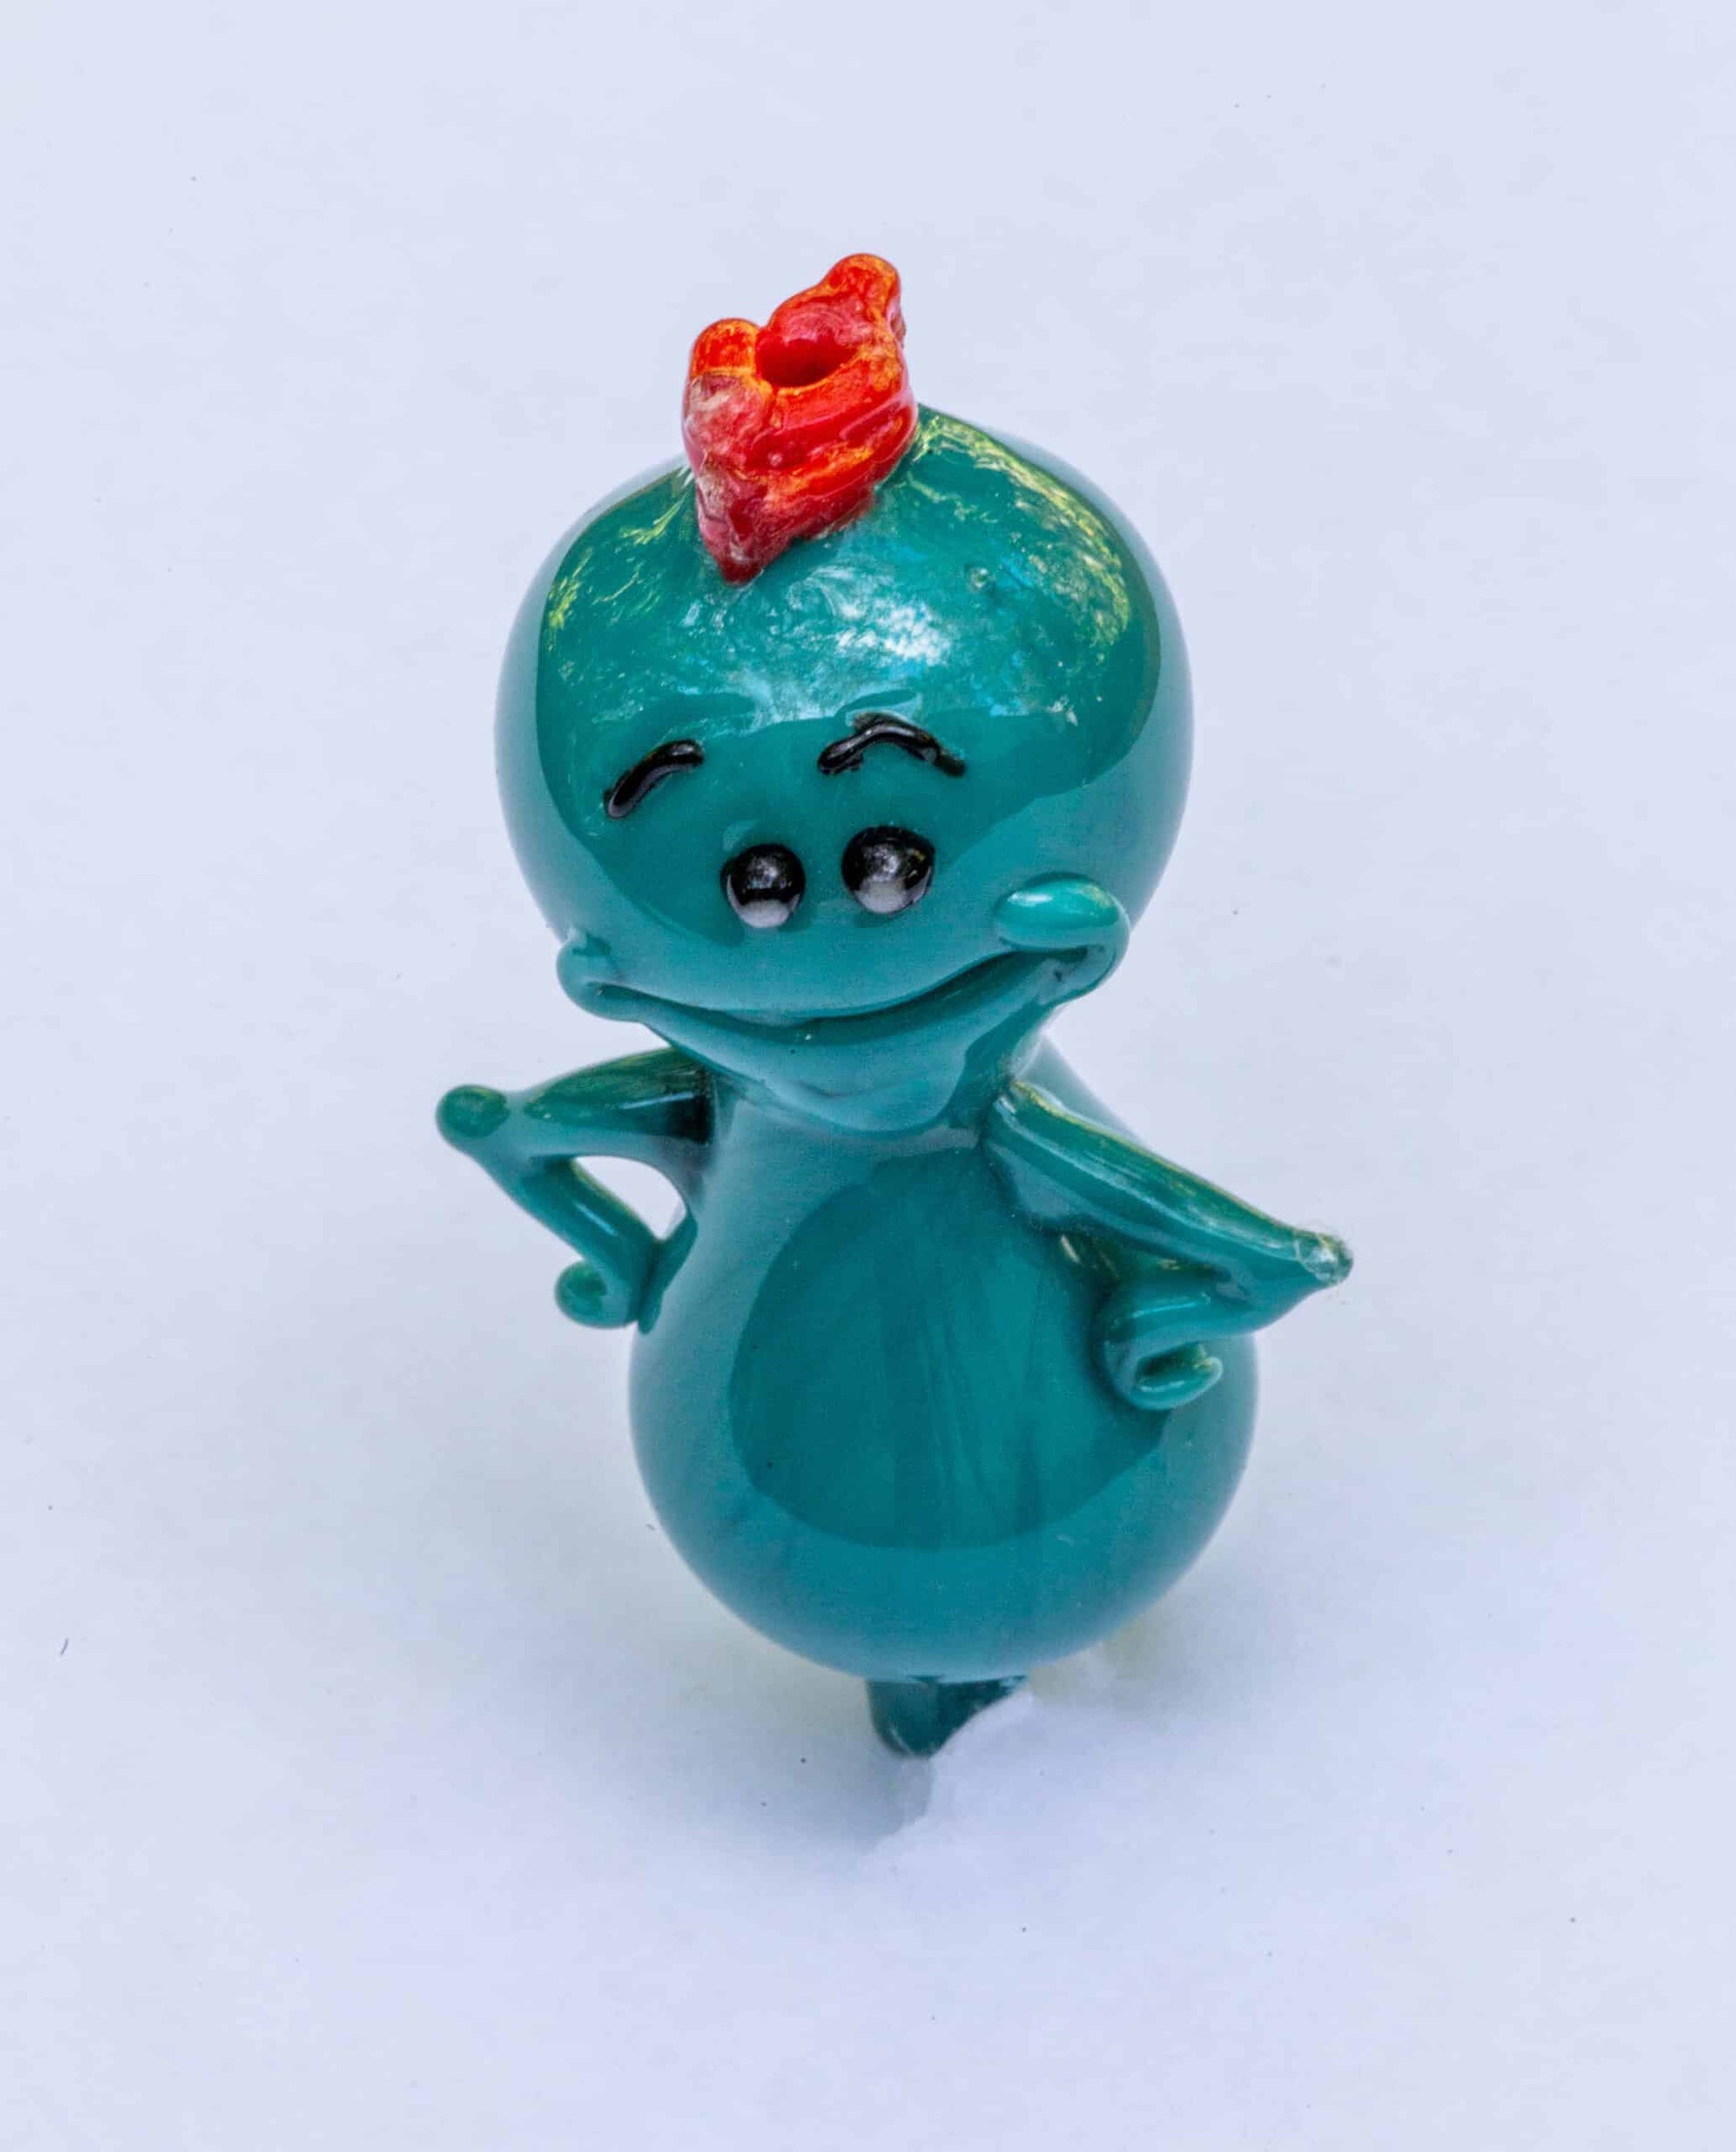 exclusive design of the Meeseeks Bubble Carb Cap by Tammy Baller